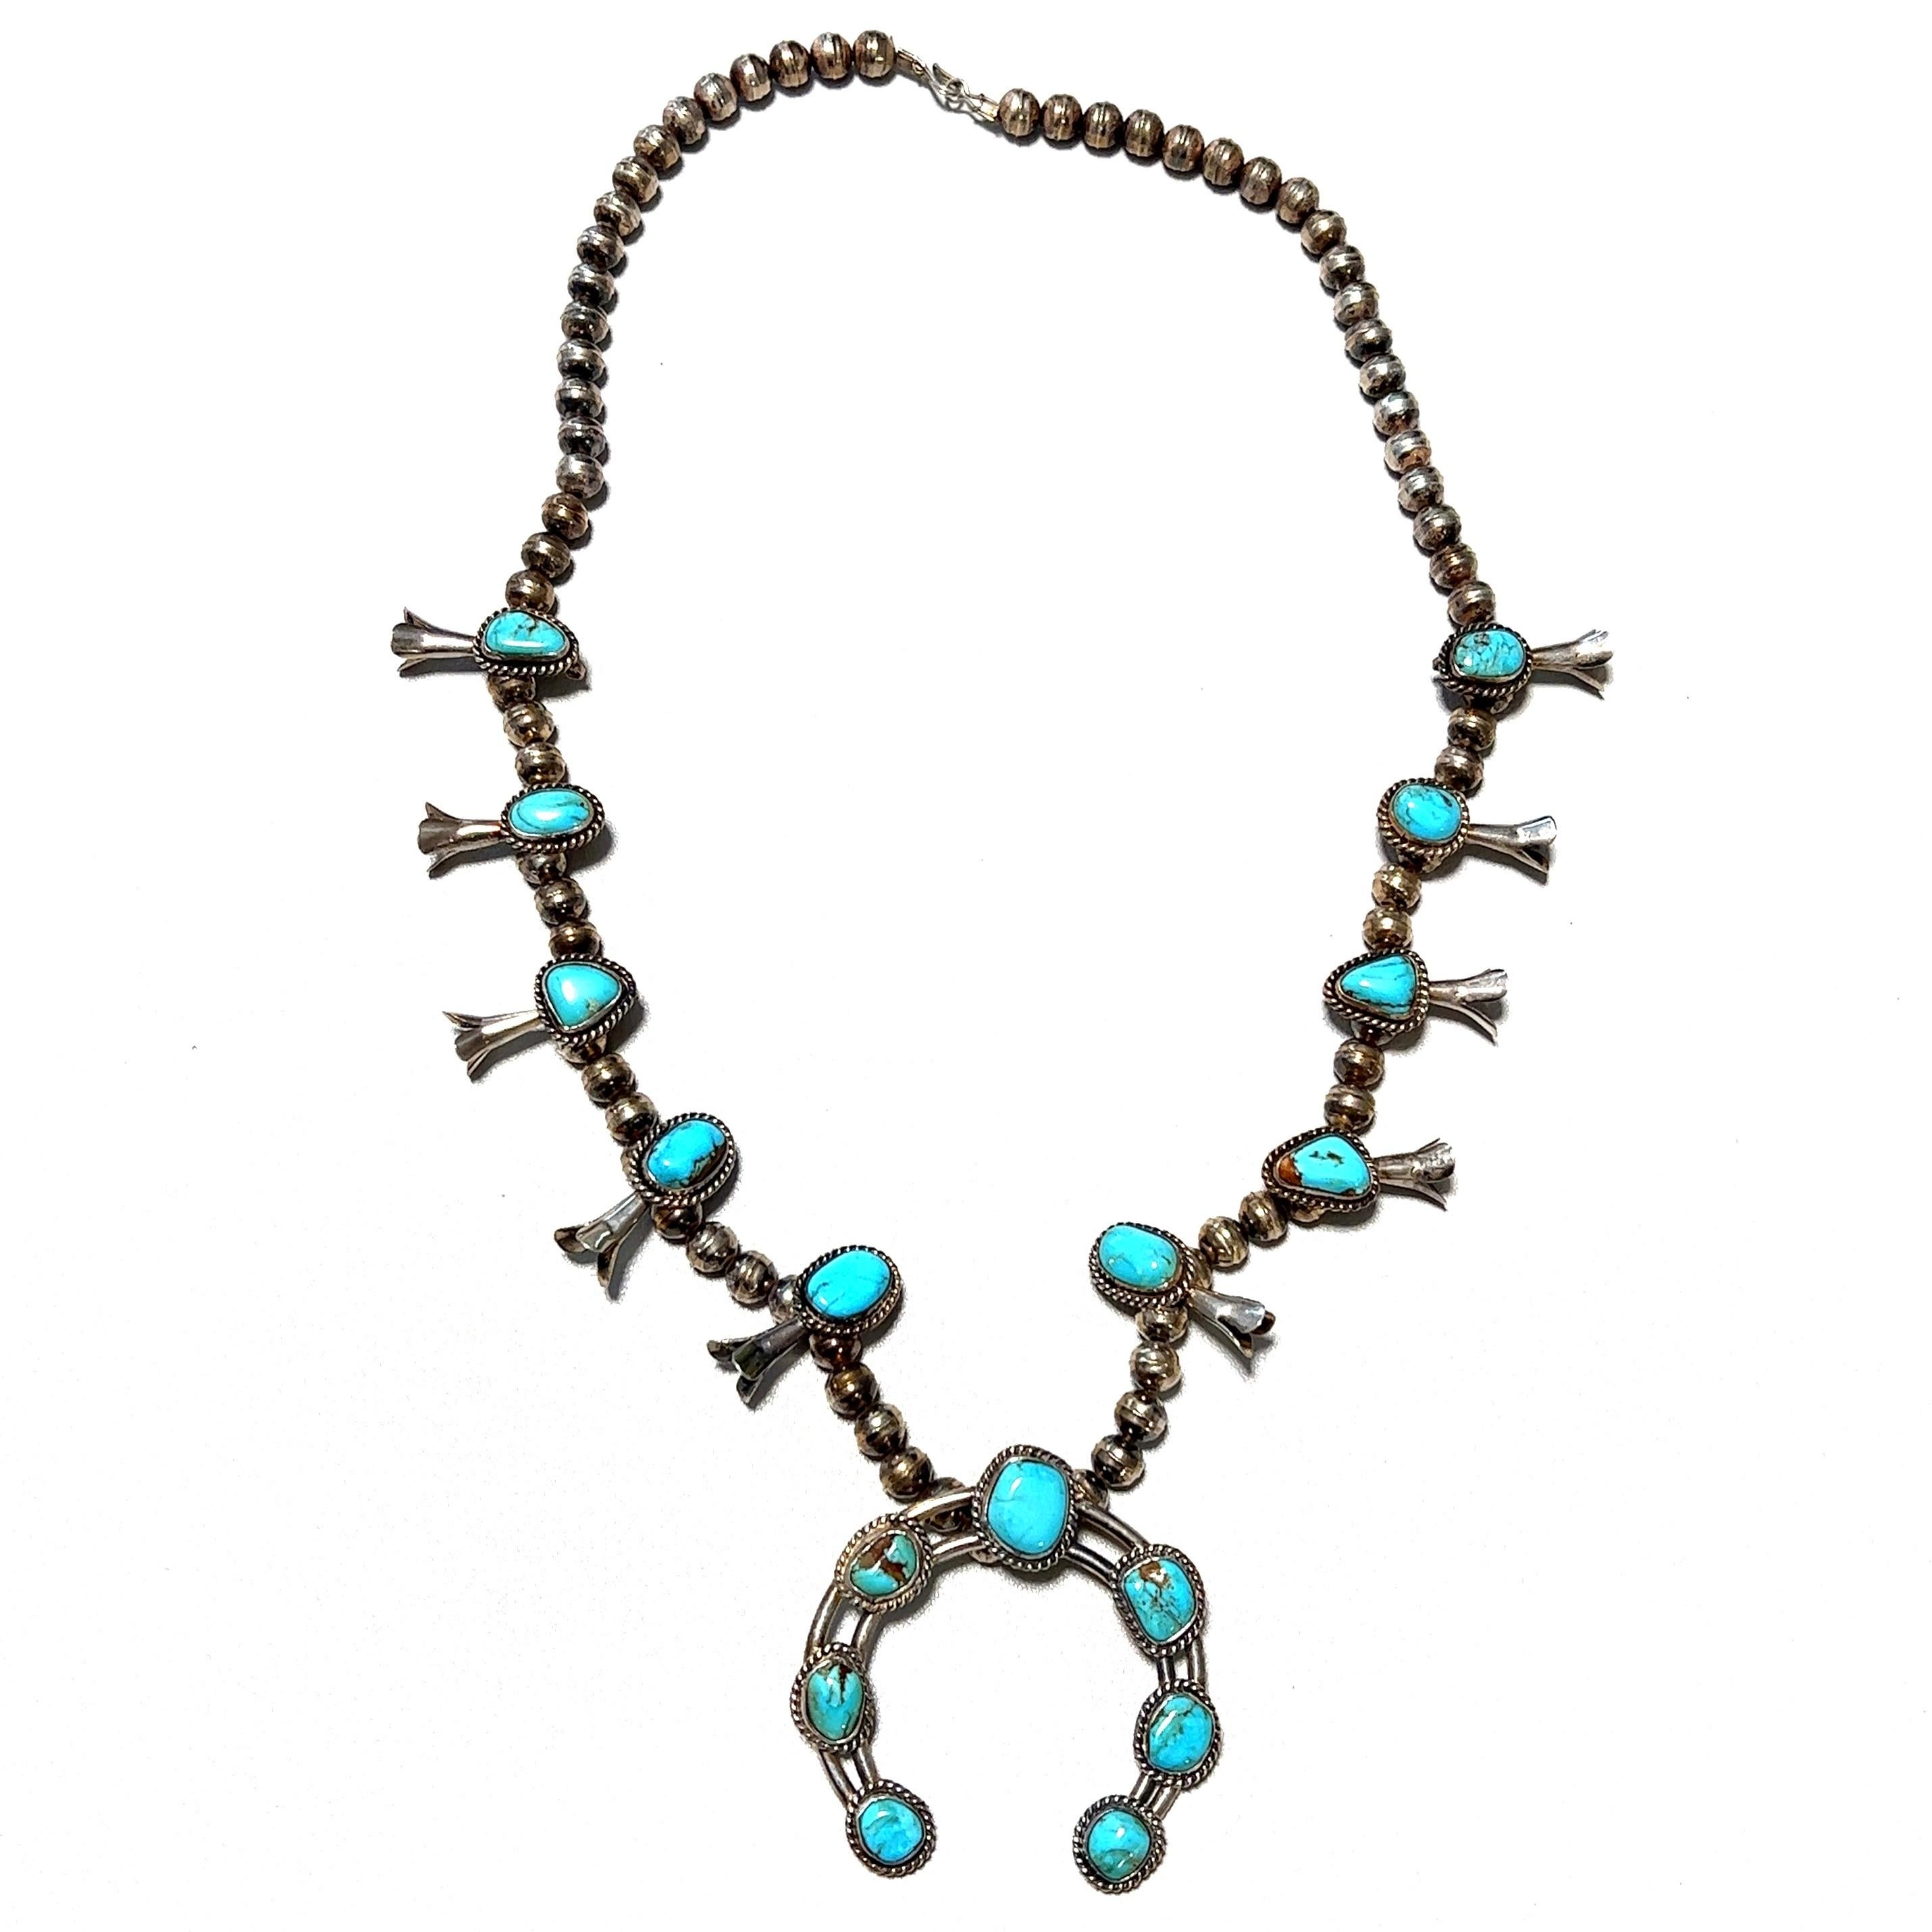 Simply Beautiful! Highly desirable Large Native American original Old Pawn Navajo Squash Blossom Necklace. Featuring 17 Turquoise Sleeping Beauty stations with a large center horseshoe Pendant. Measuring approx. 25